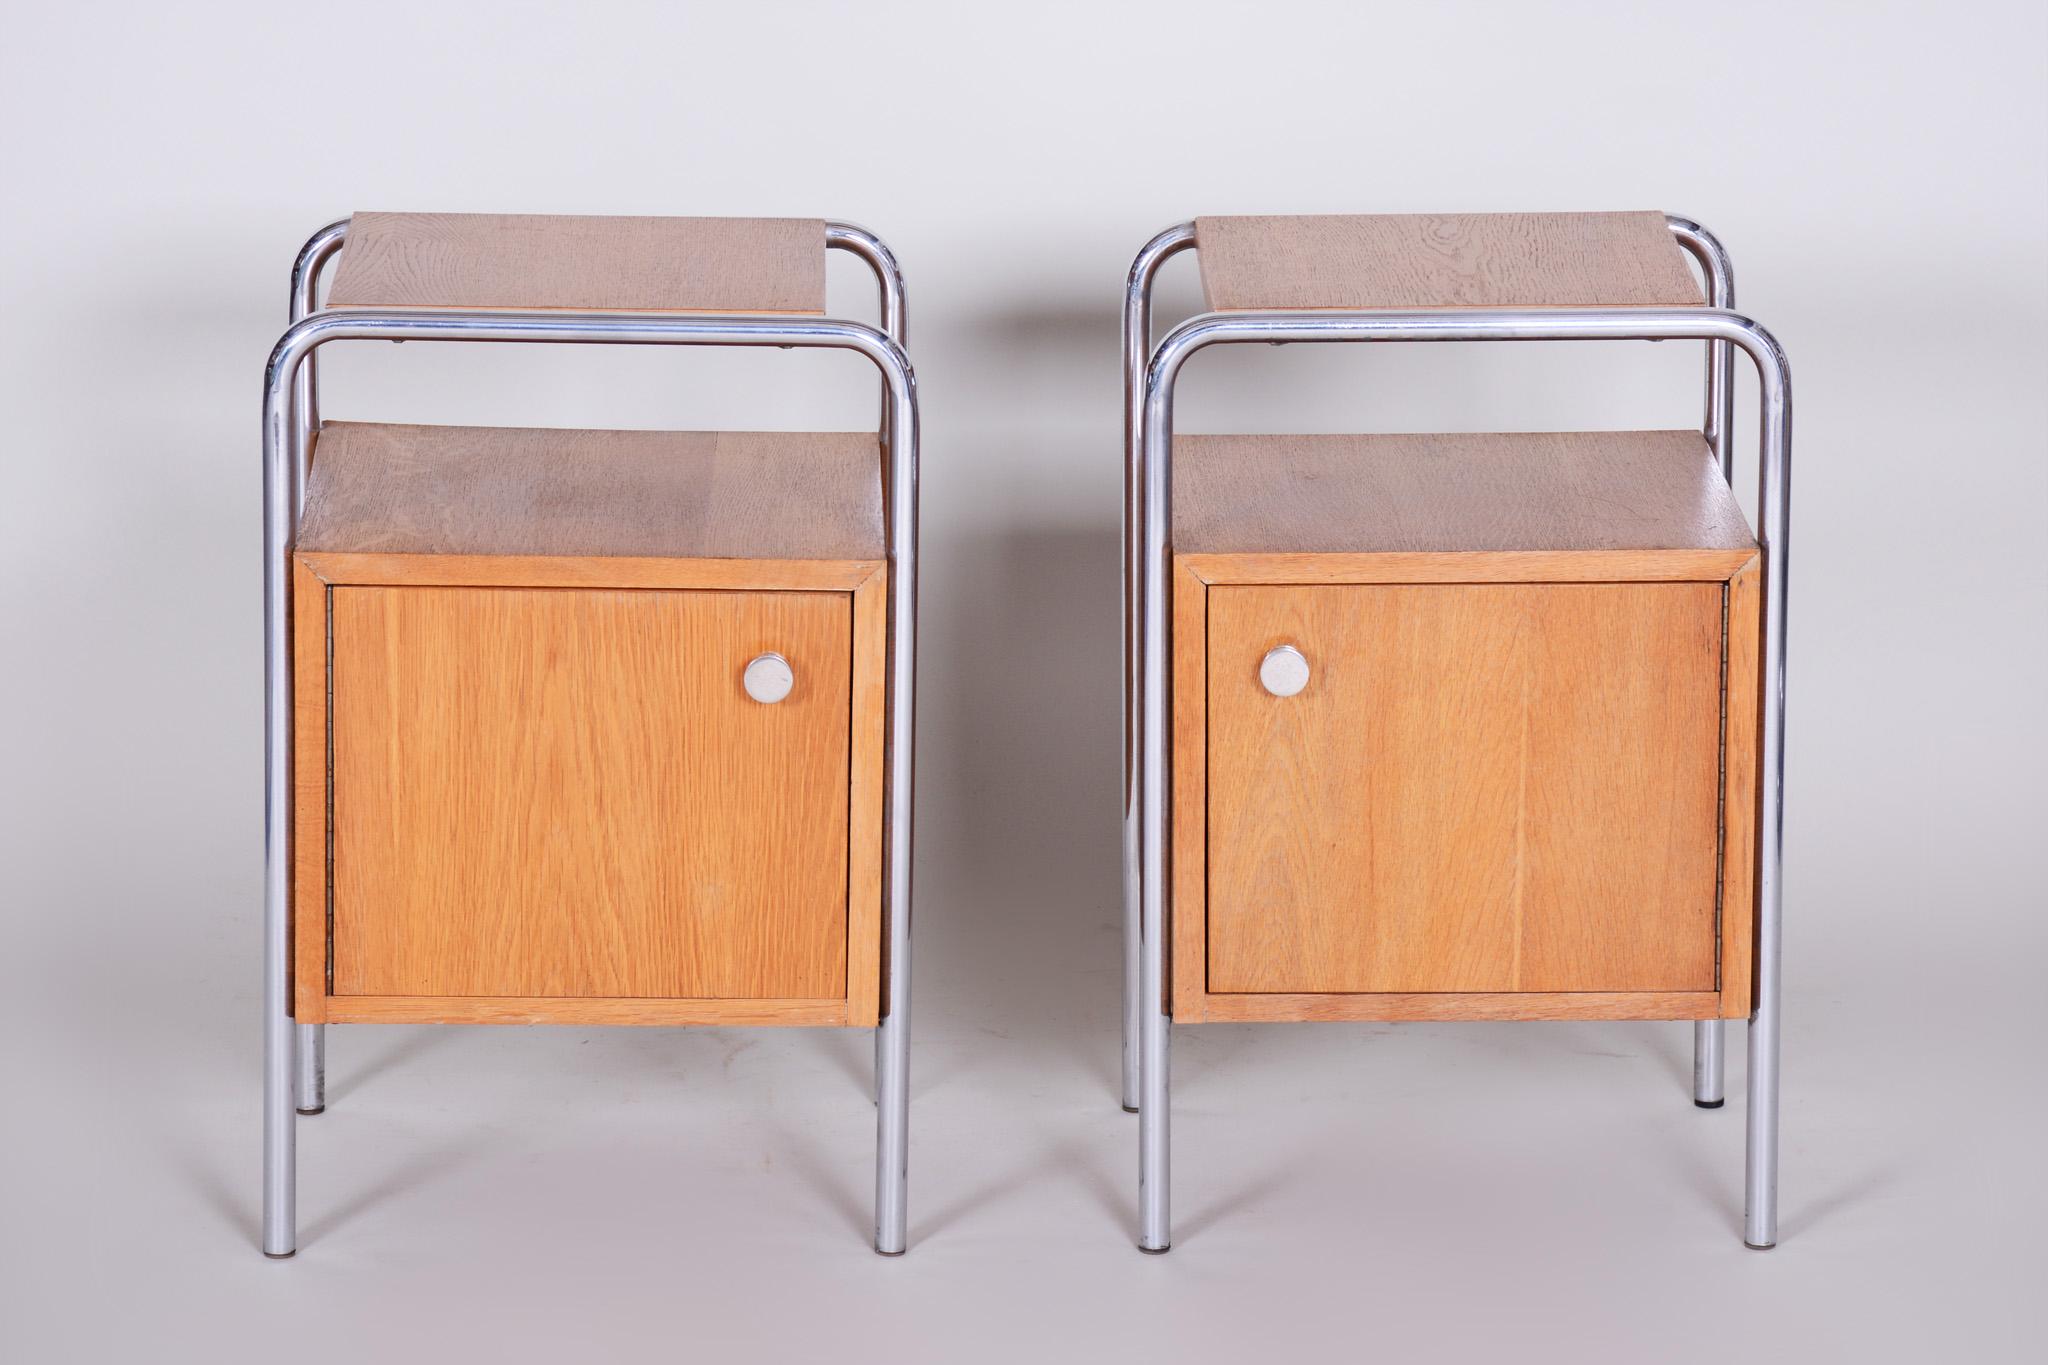 Pair of Bauhaus bed-side tables from Czech Republic.
Completely restored, surface polished.

Maker: Robert Slezák

We guarantee safe a the cheapest air transport from Europe to the whole world within 7 days.
The price is the same as for ship